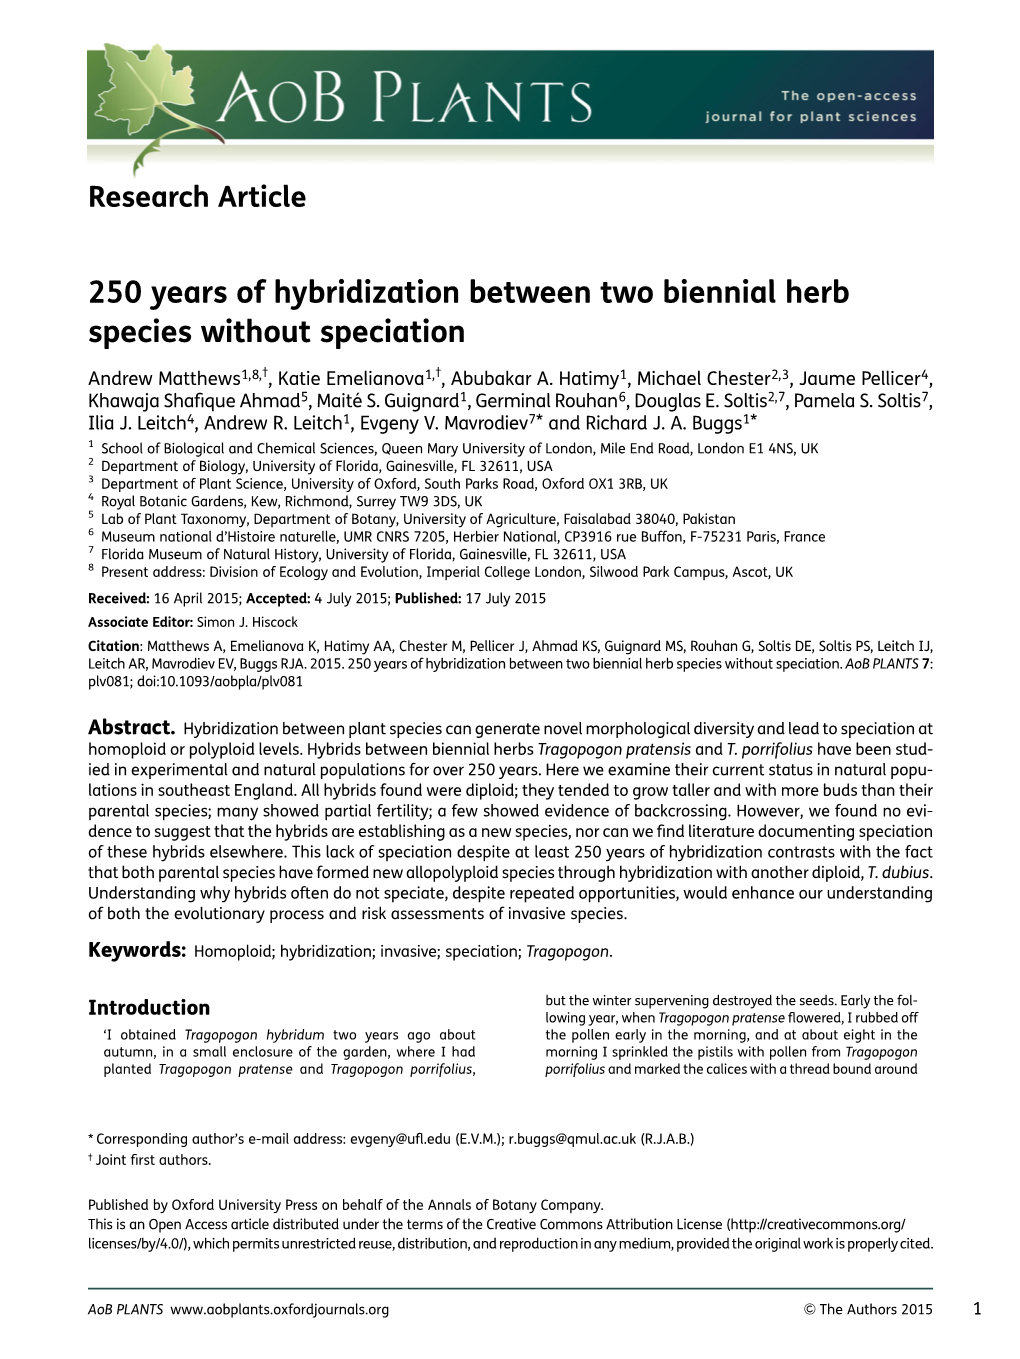 250 Years of Hybridization Between Two Biennial Herb Species Without Speciation